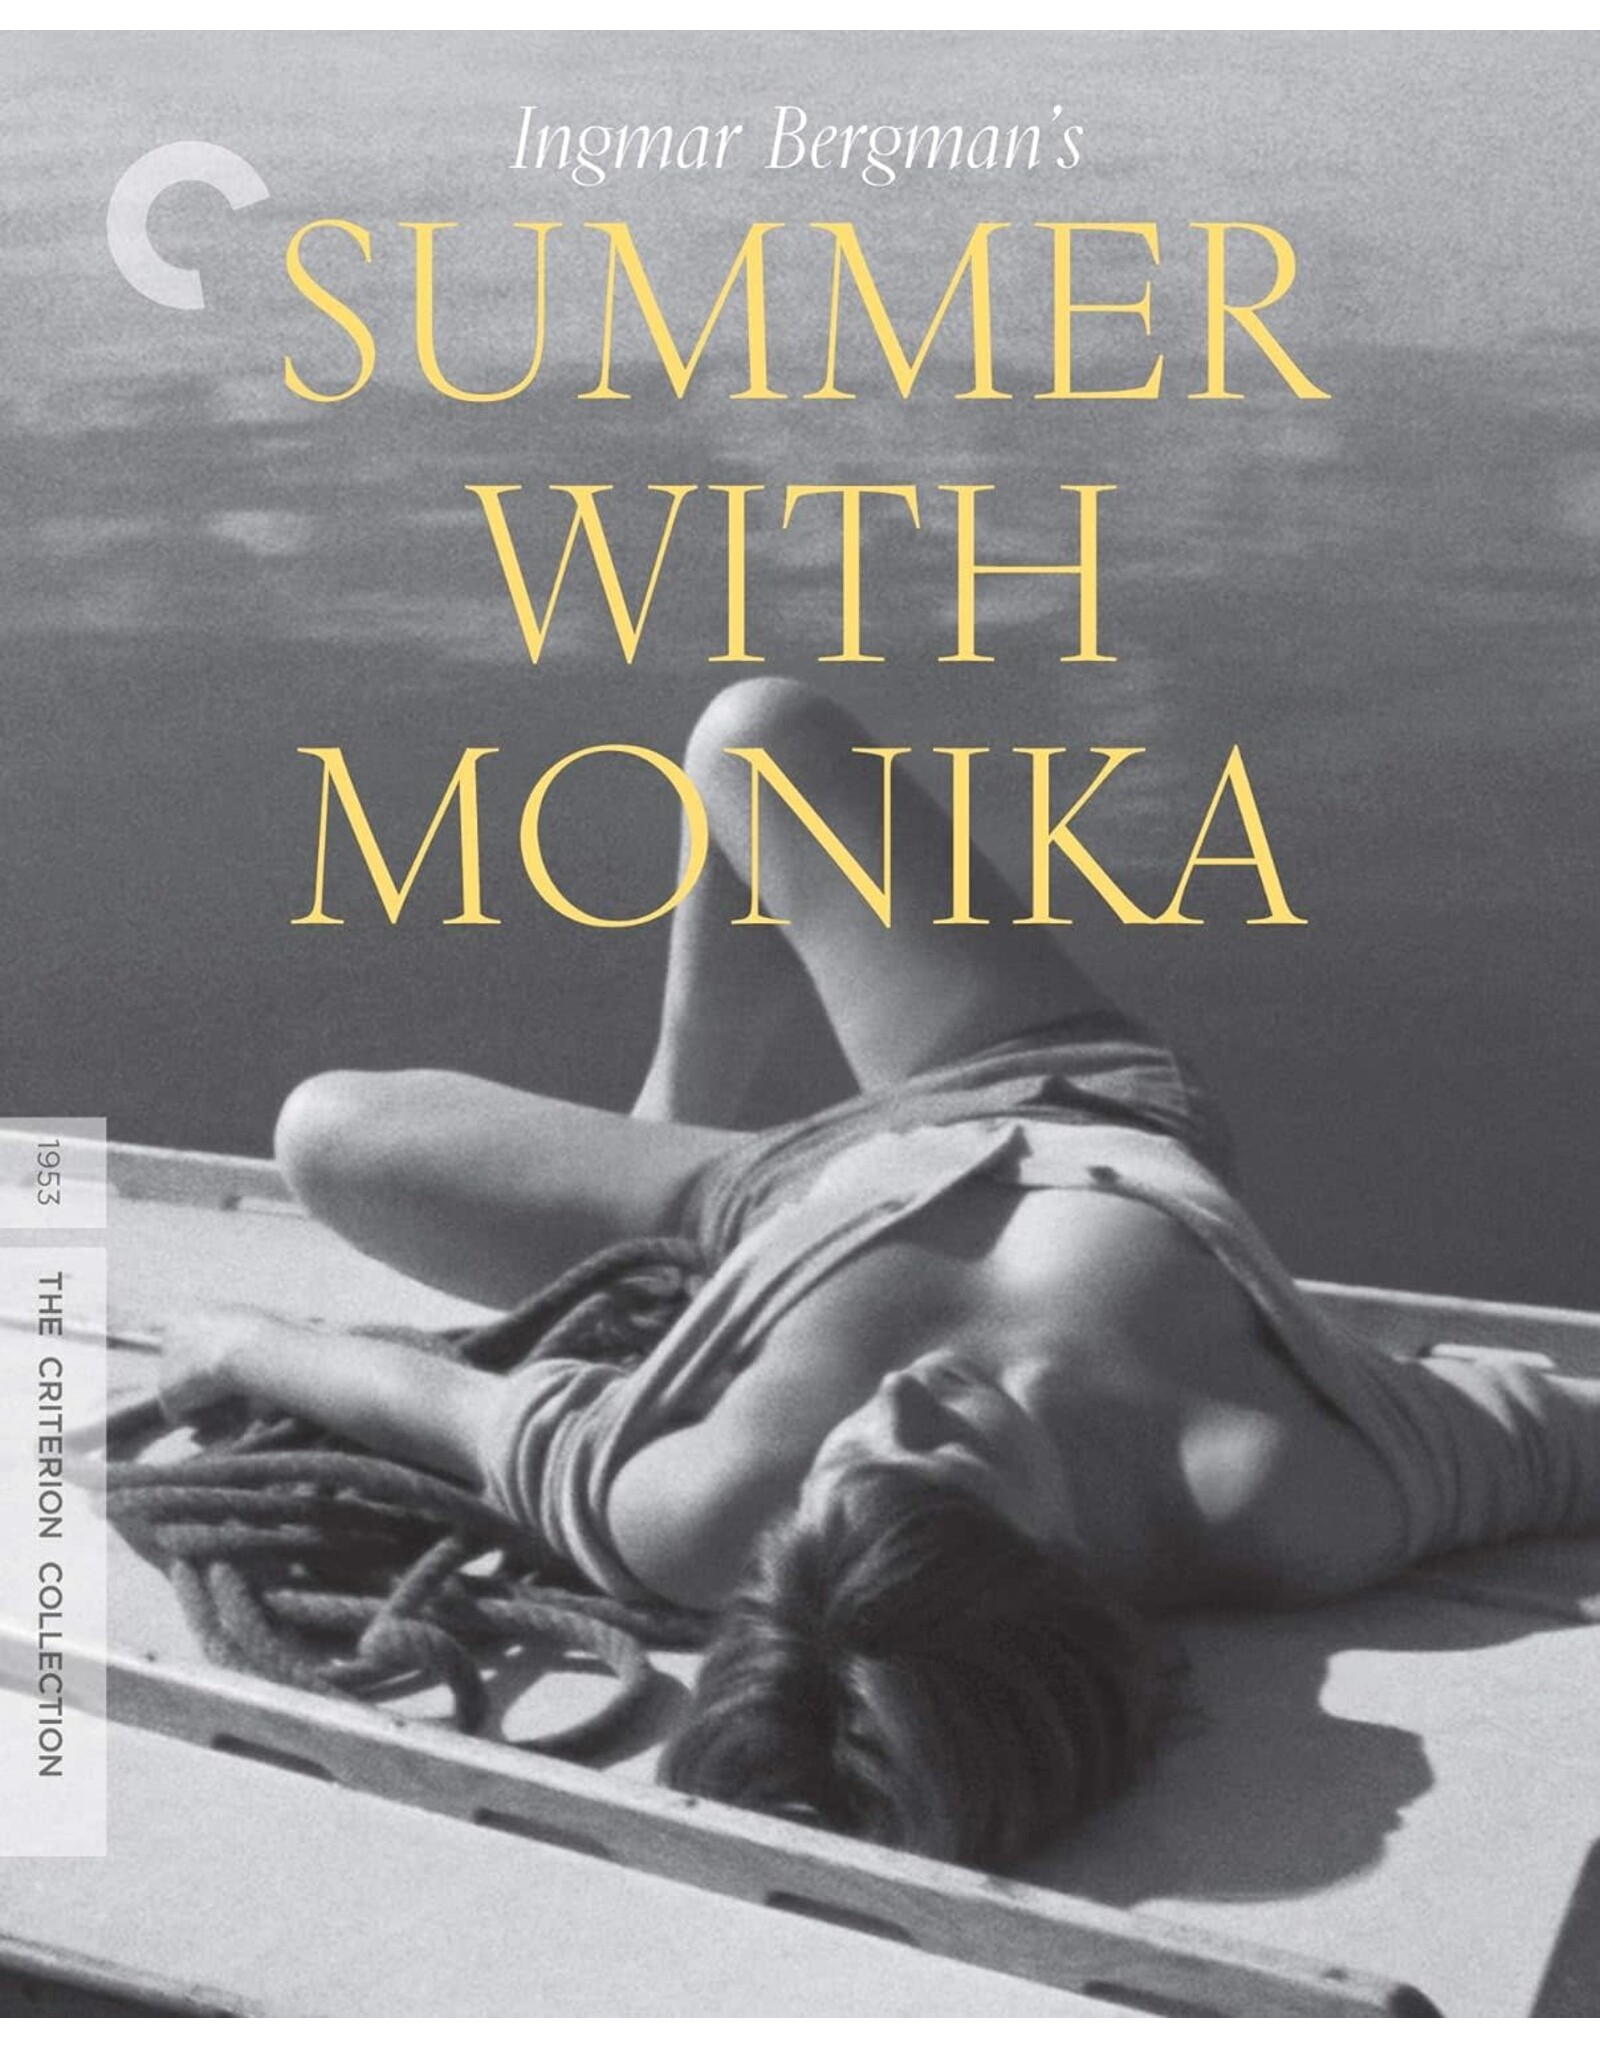 Criterion Collection Summer With Monika - Criterion Collection (Used)